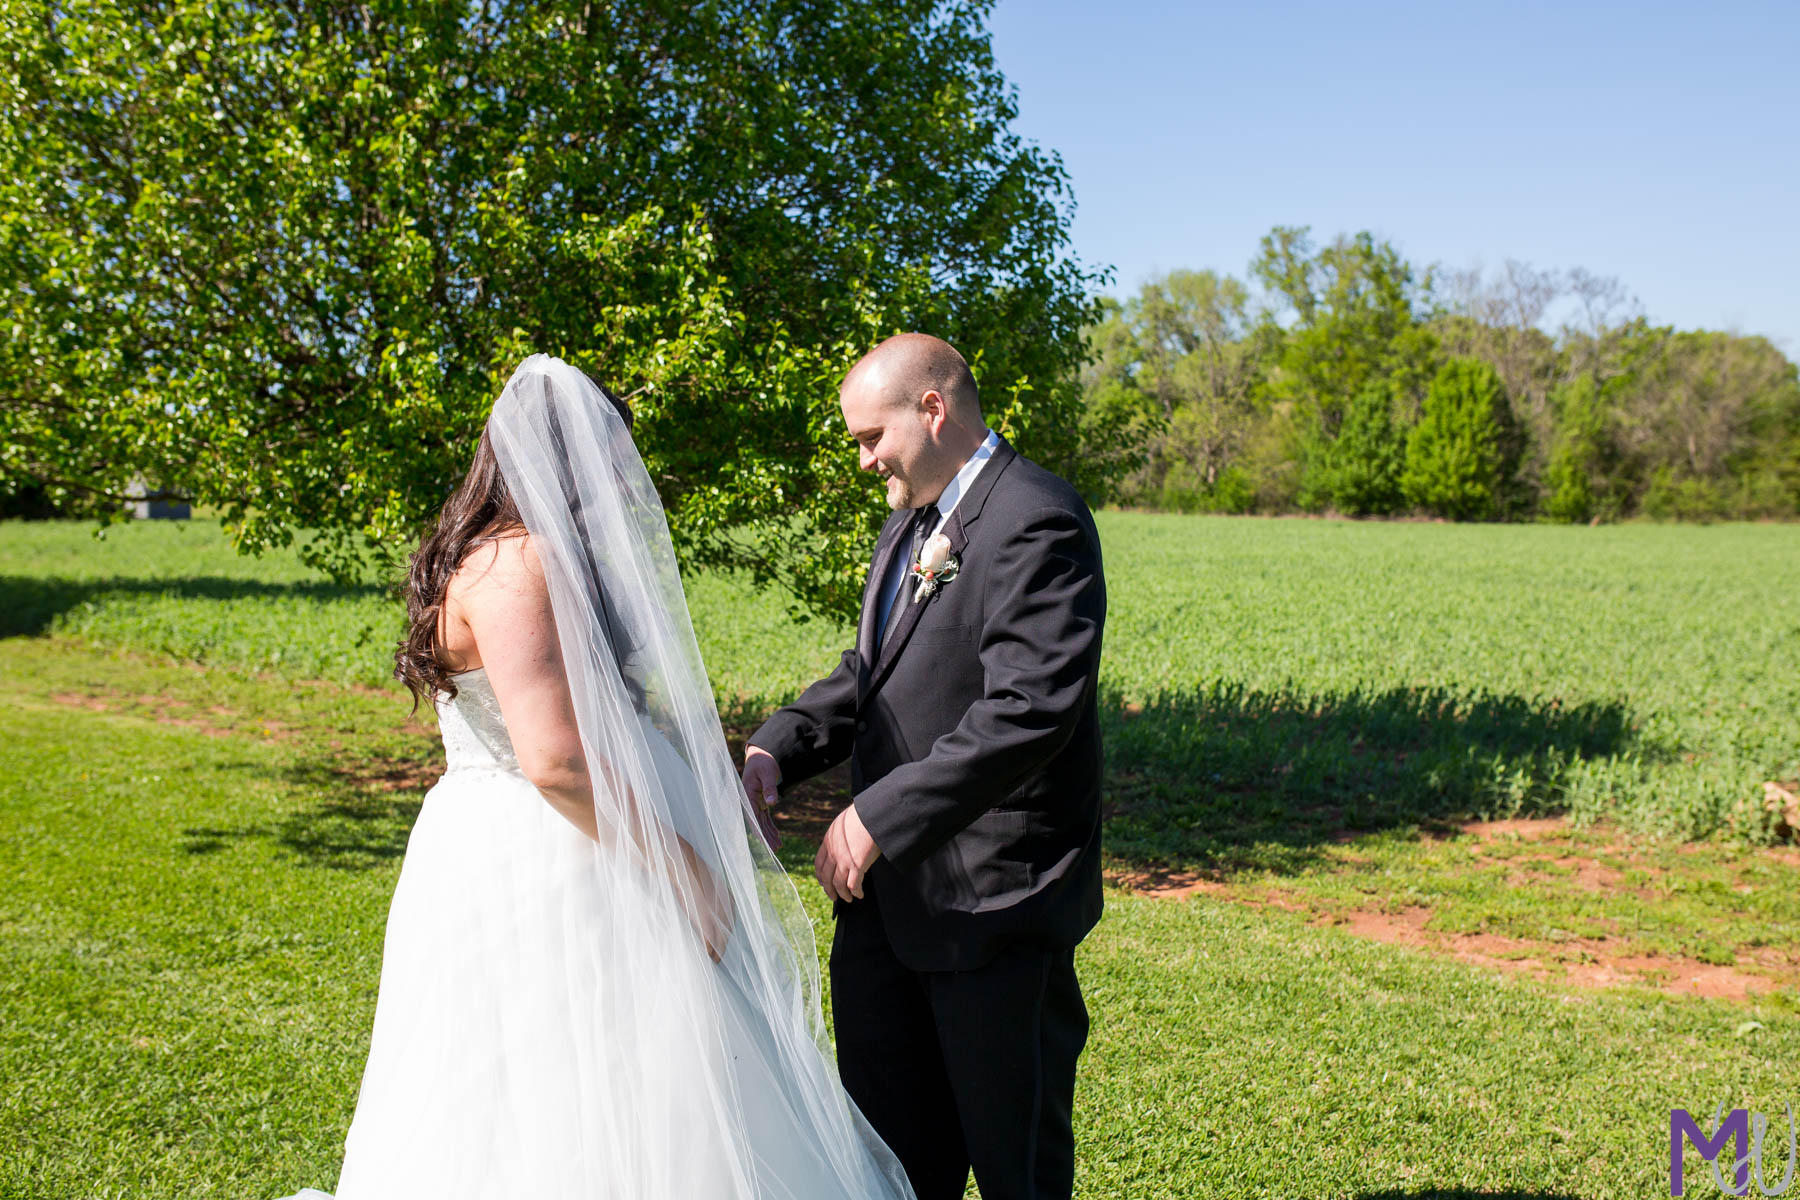 outdoor wedding under the trees in Athens, GA